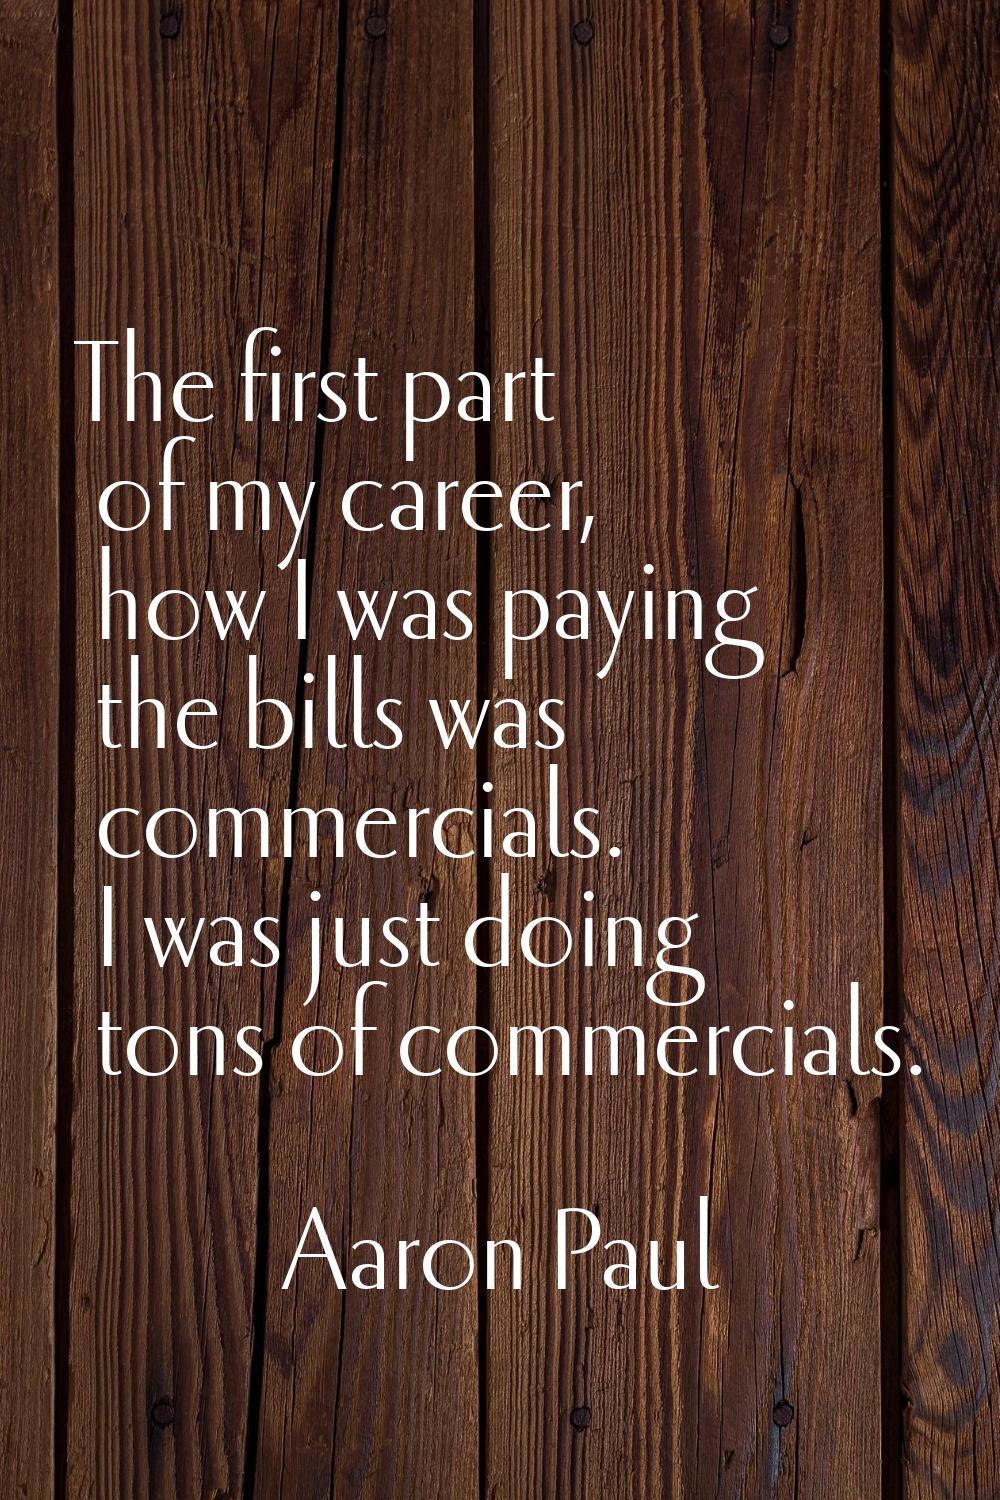 The first part of my career, how I was paying the bills was commercials. I was just doing tons of c